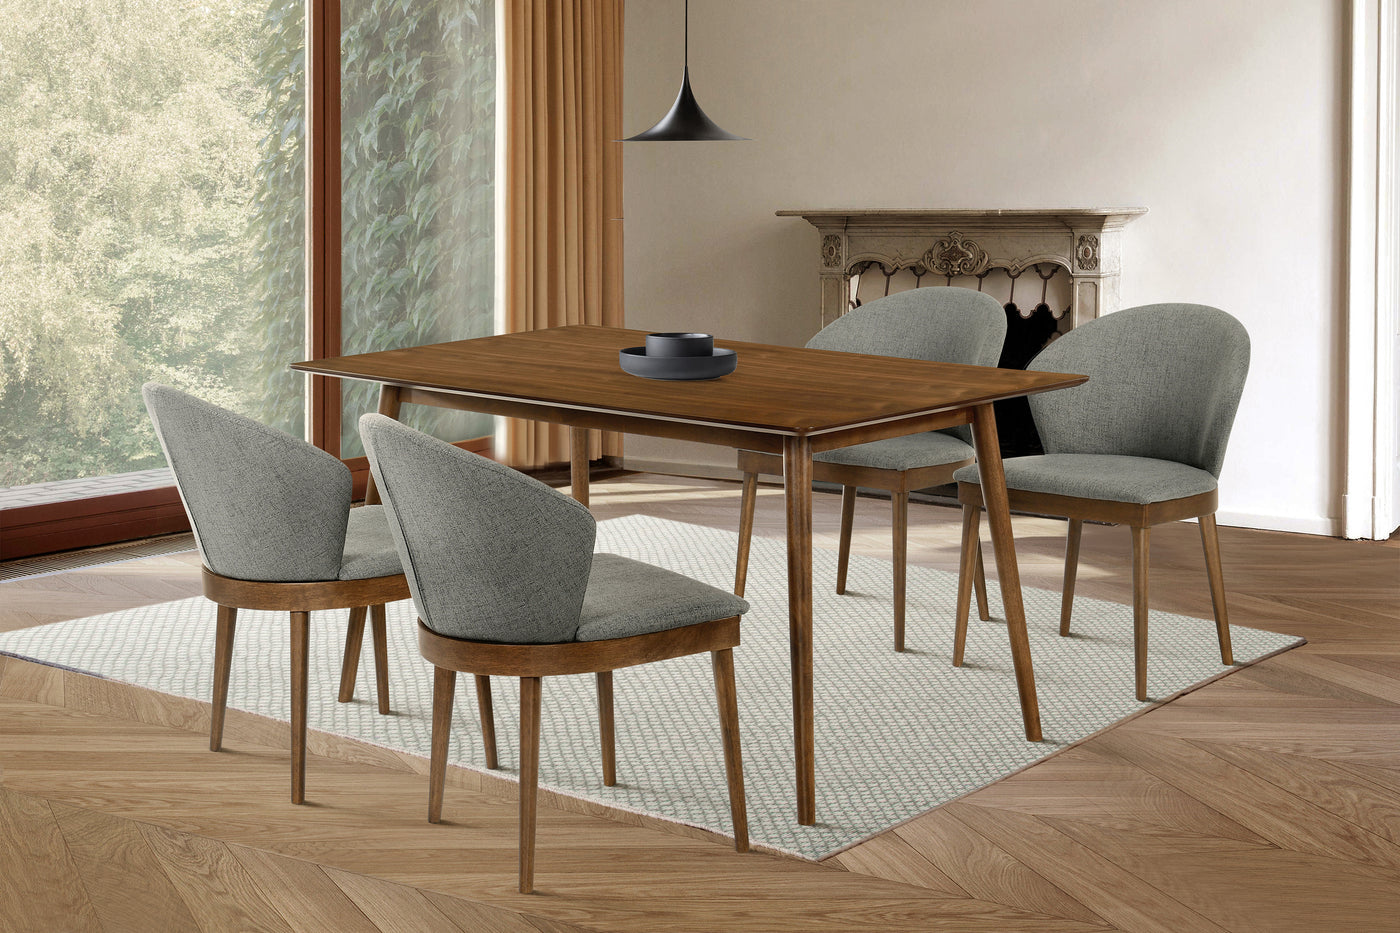 Westmont and Juno 5-Piece Dining Set